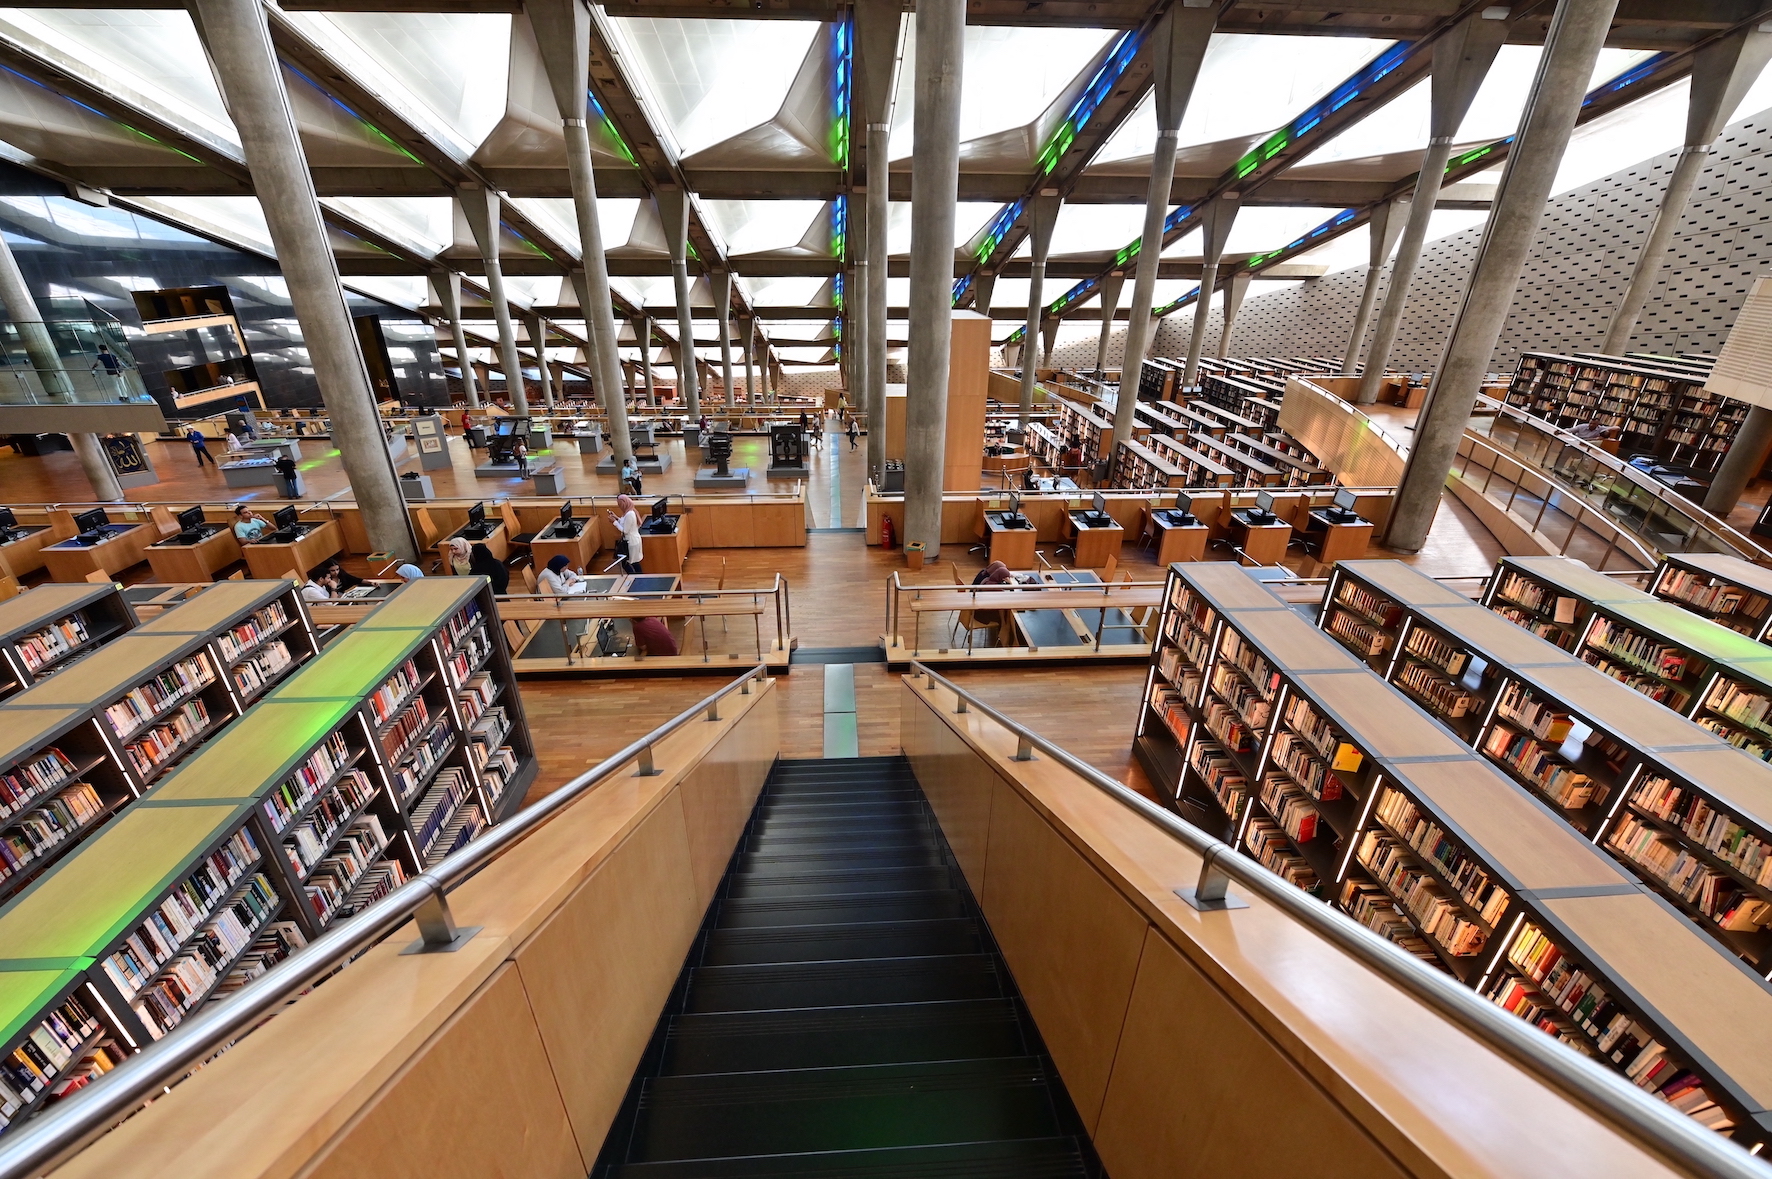 A general view of the interior of the Bibliotheca Alexandrina library (AFP/ Giuseppe Cacace)